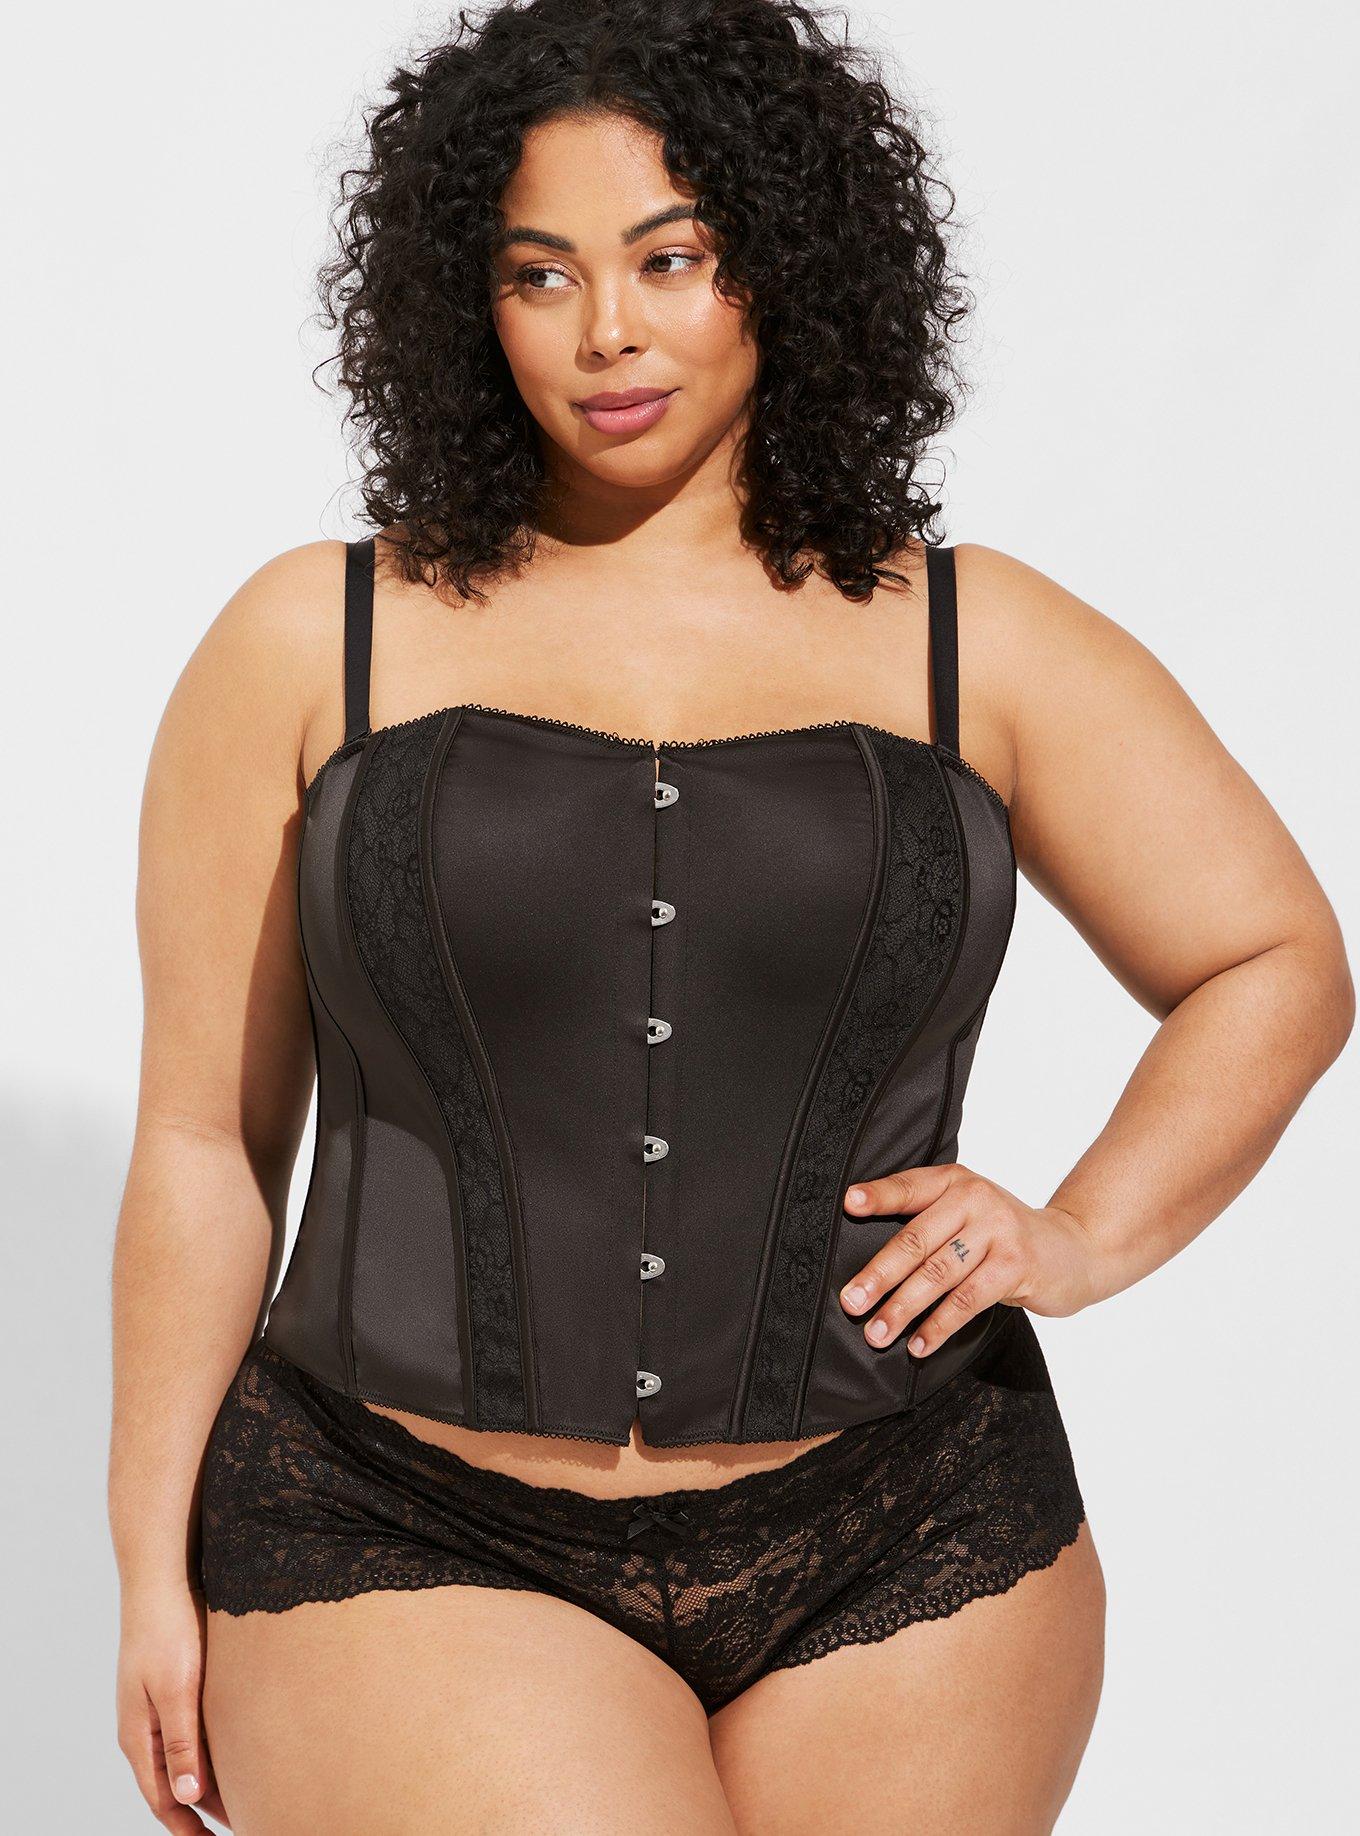 Adore me strapless corset (ties up the back latches